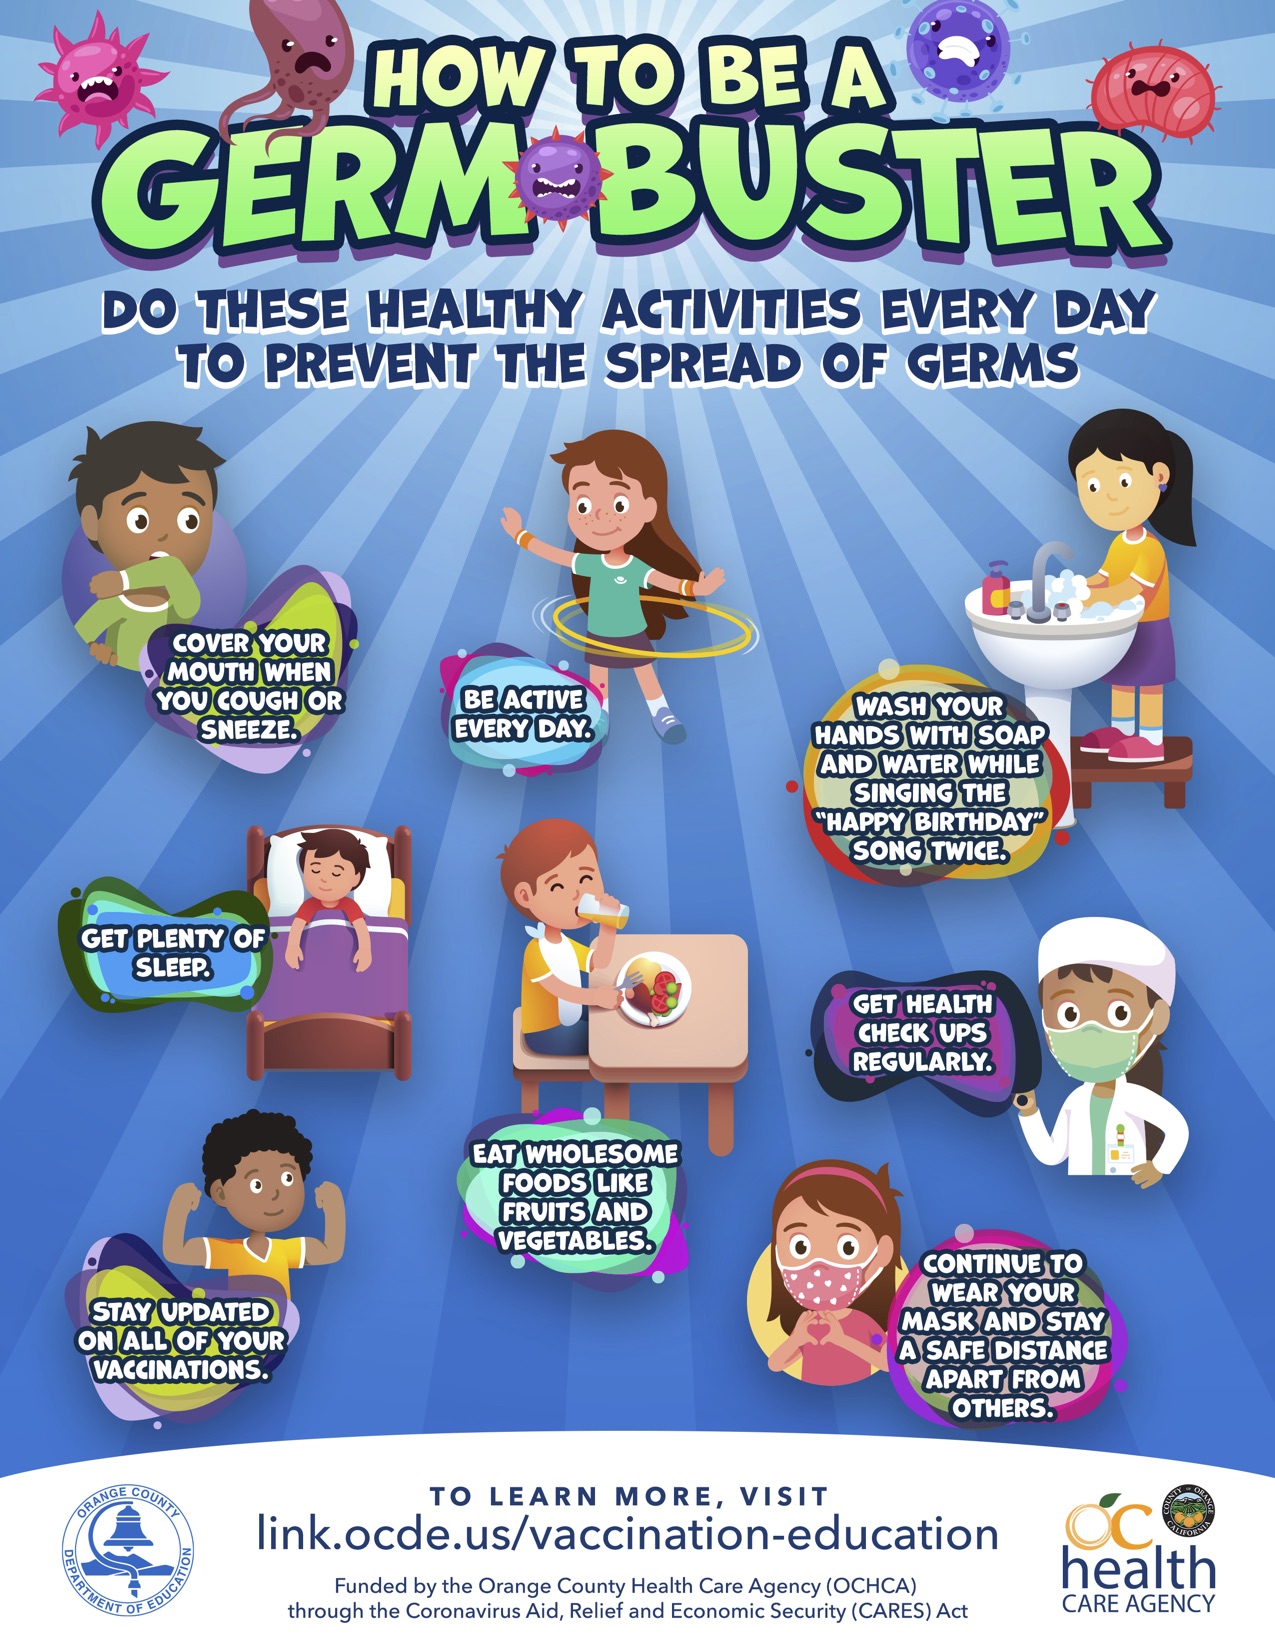 Student information sheet for grades K-3, titled "How to Be a Germ Buster"